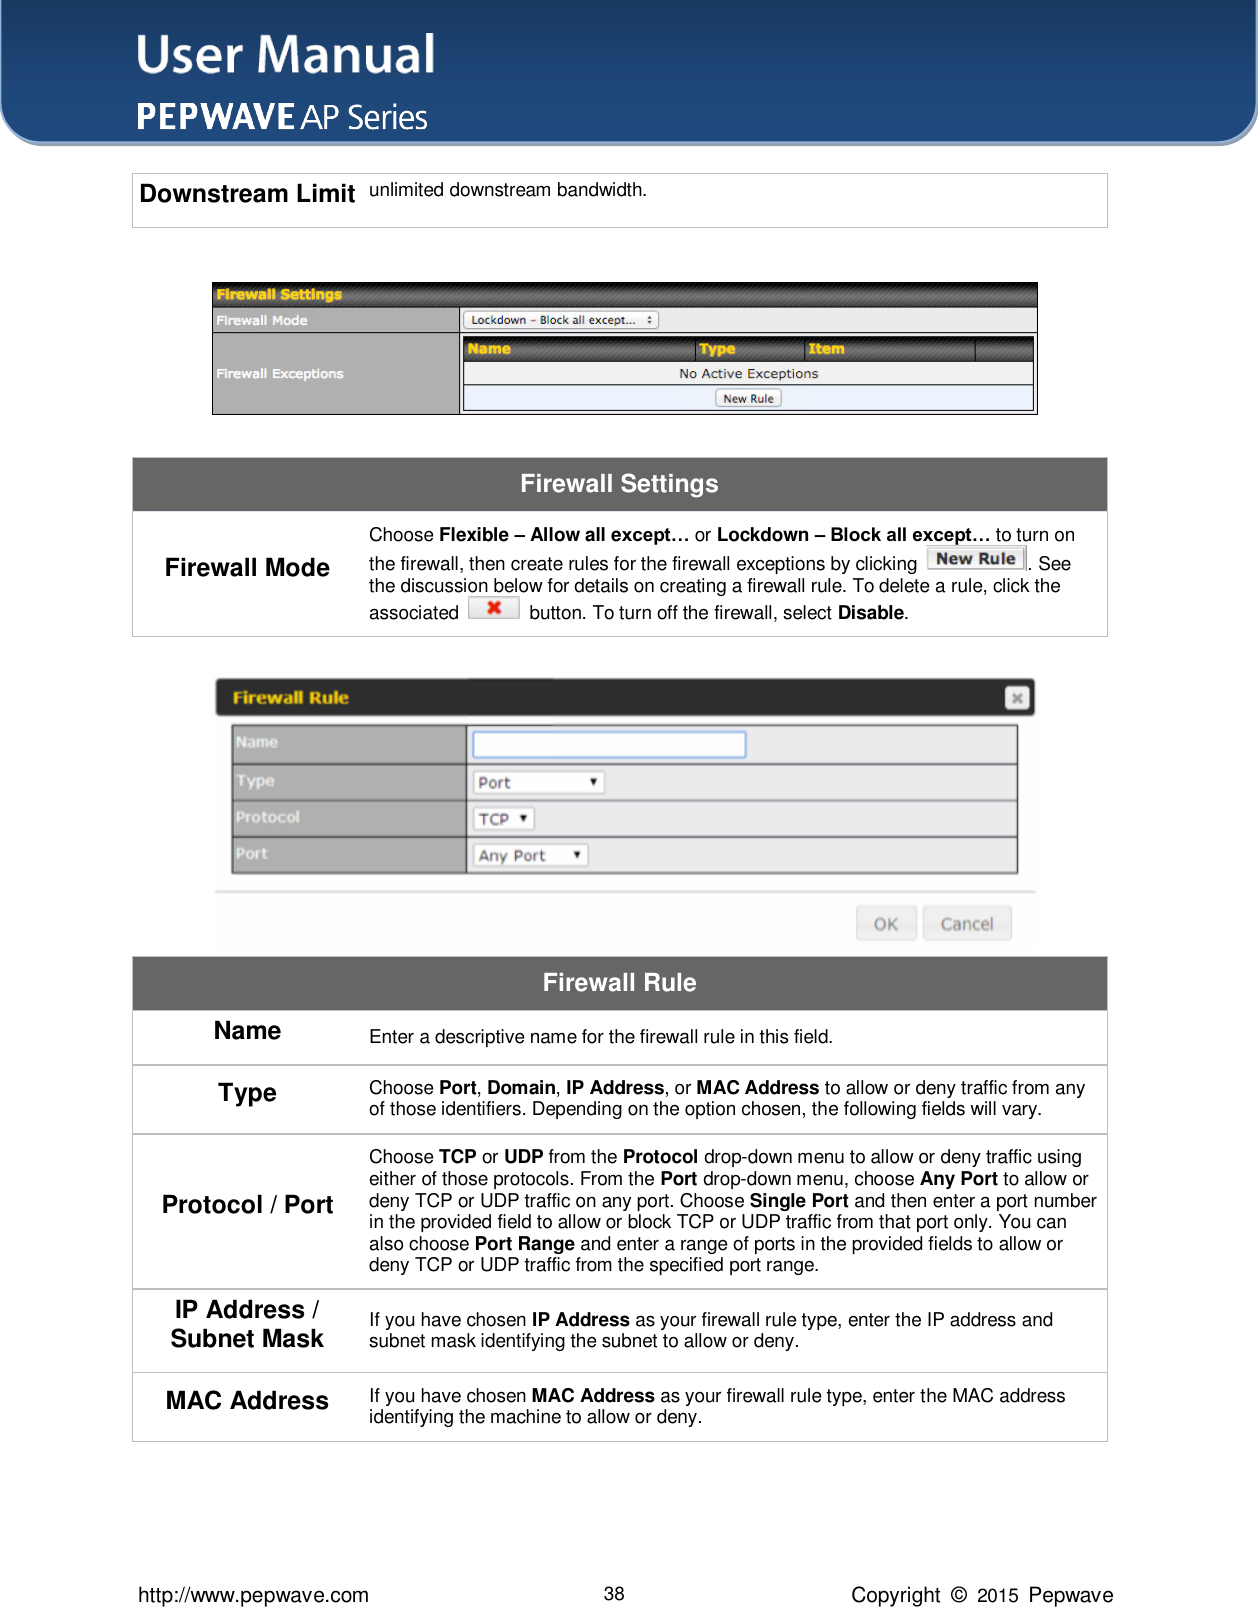 User Manual    http://www.pepwave.com 38 Copyright  ©  2015  Pepwave Downstream Limit unlimited downstream bandwidth.   Firewall Settings Firewall Mode Choose Flexible – Allow all except… or Lockdown – Block all except… to turn on the firewall, then create rules for the firewall exceptions by clicking  . See the discussion below for details on creating a firewall rule. To delete a rule, click the associated    button. To turn off the firewall, select Disable.   Firewall Rule Name Enter a descriptive name for the firewall rule in this field. Type Choose Port, Domain, IP Address, or MAC Address to allow or deny traffic from any of those identifiers. Depending on the option chosen, the following fields will vary. Protocol / Port Choose TCP or UDP from the Protocol drop-down menu to allow or deny traffic using either of those protocols. From the Port drop-down menu, choose Any Port to allow or deny TCP or UDP traffic on any port. Choose Single Port and then enter a port number in the provided field to allow or block TCP or UDP traffic from that port only. You can also choose Port Range and enter a range of ports in the provided fields to allow or deny TCP or UDP traffic from the specified port range. IP Address / Subnet Mask If you have chosen IP Address as your firewall rule type, enter the IP address and subnet mask identifying the subnet to allow or deny. MAC Address If you have chosen MAC Address as your firewall rule type, enter the MAC address identifying the machine to allow or deny.   